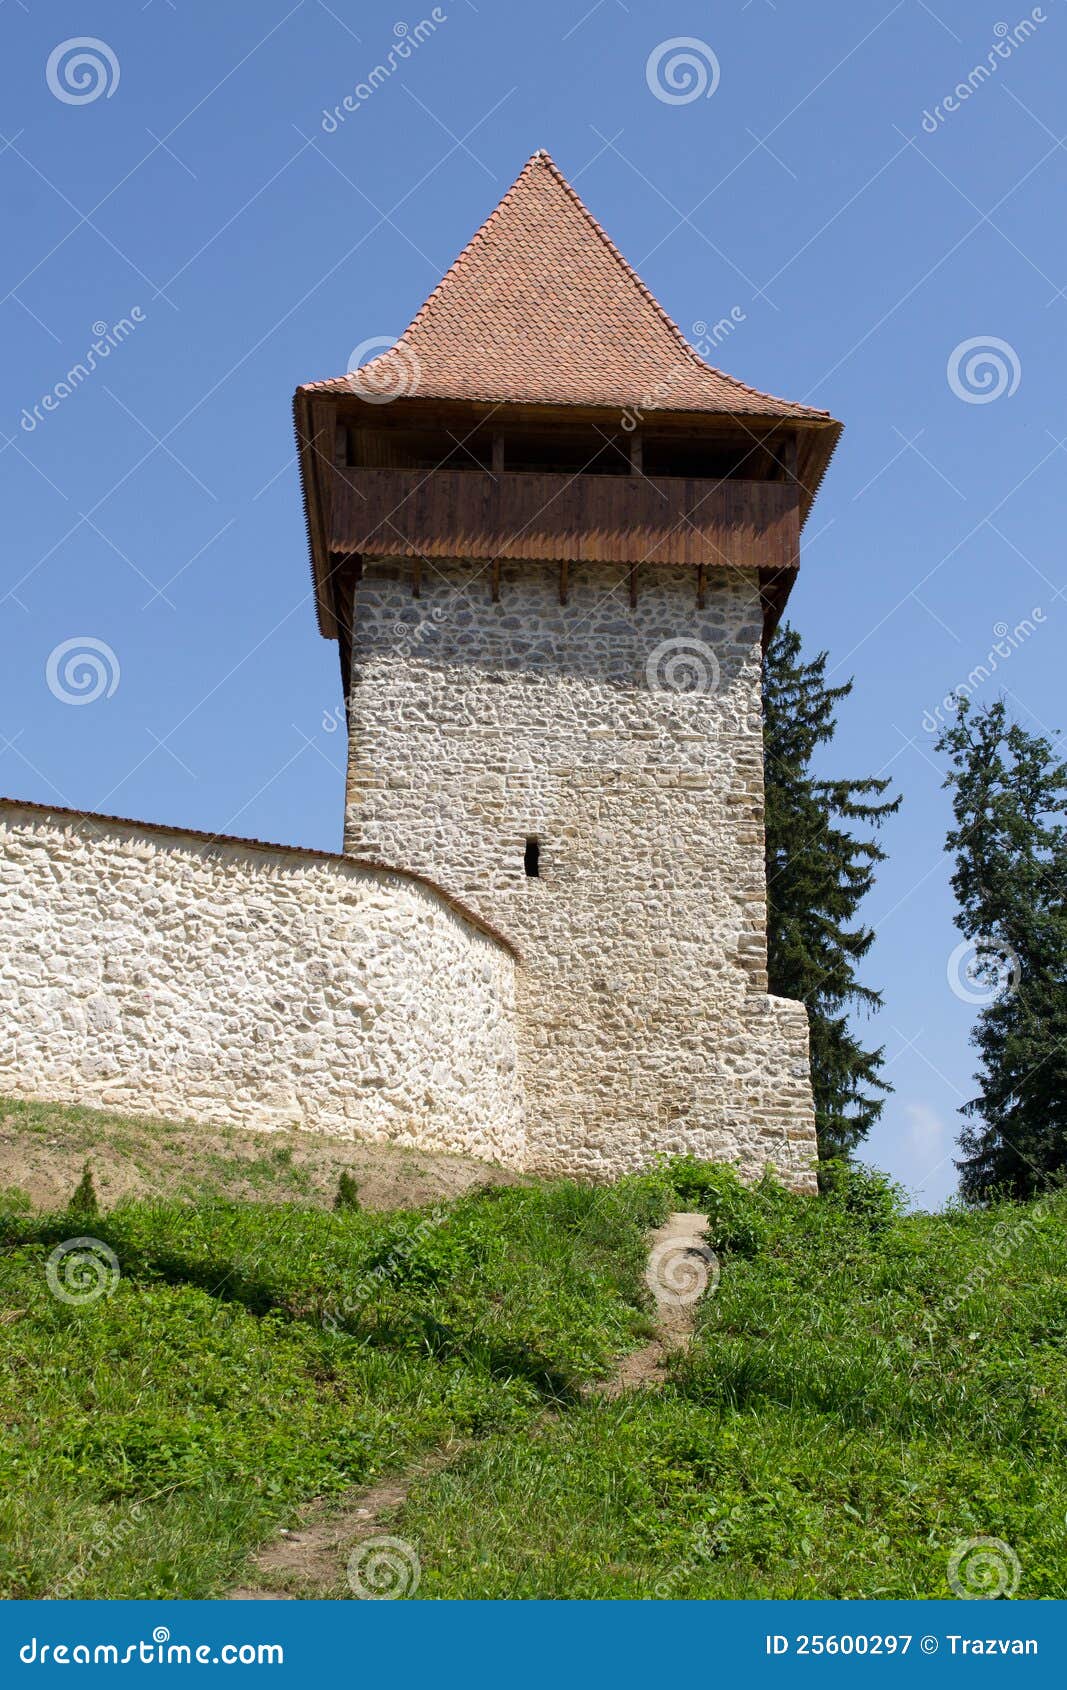 Medieval Fortress Tower stock image. Image of knight - 25600297